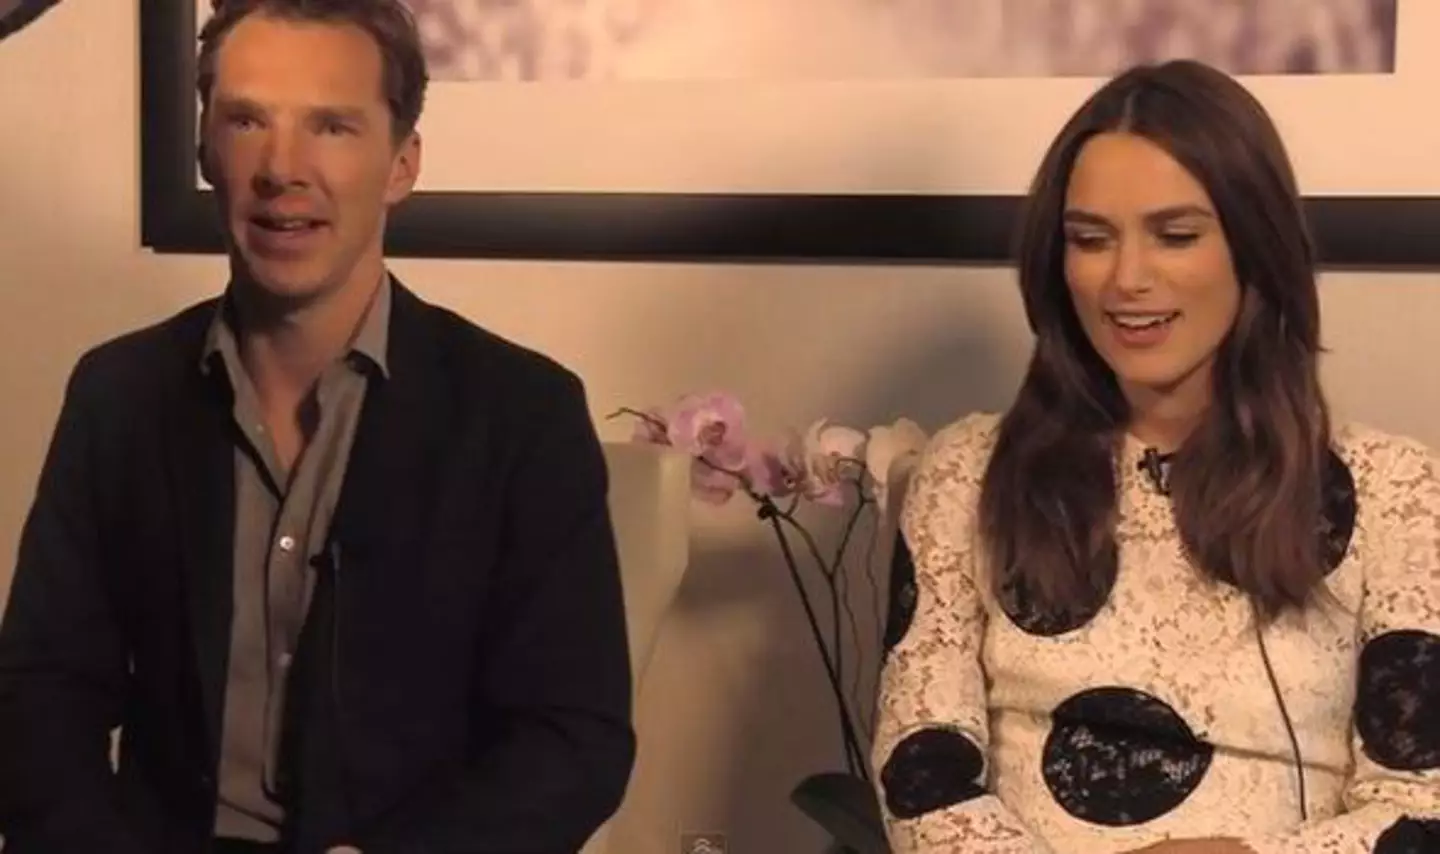 Cumberbatch jumped to his co-star’s defence.